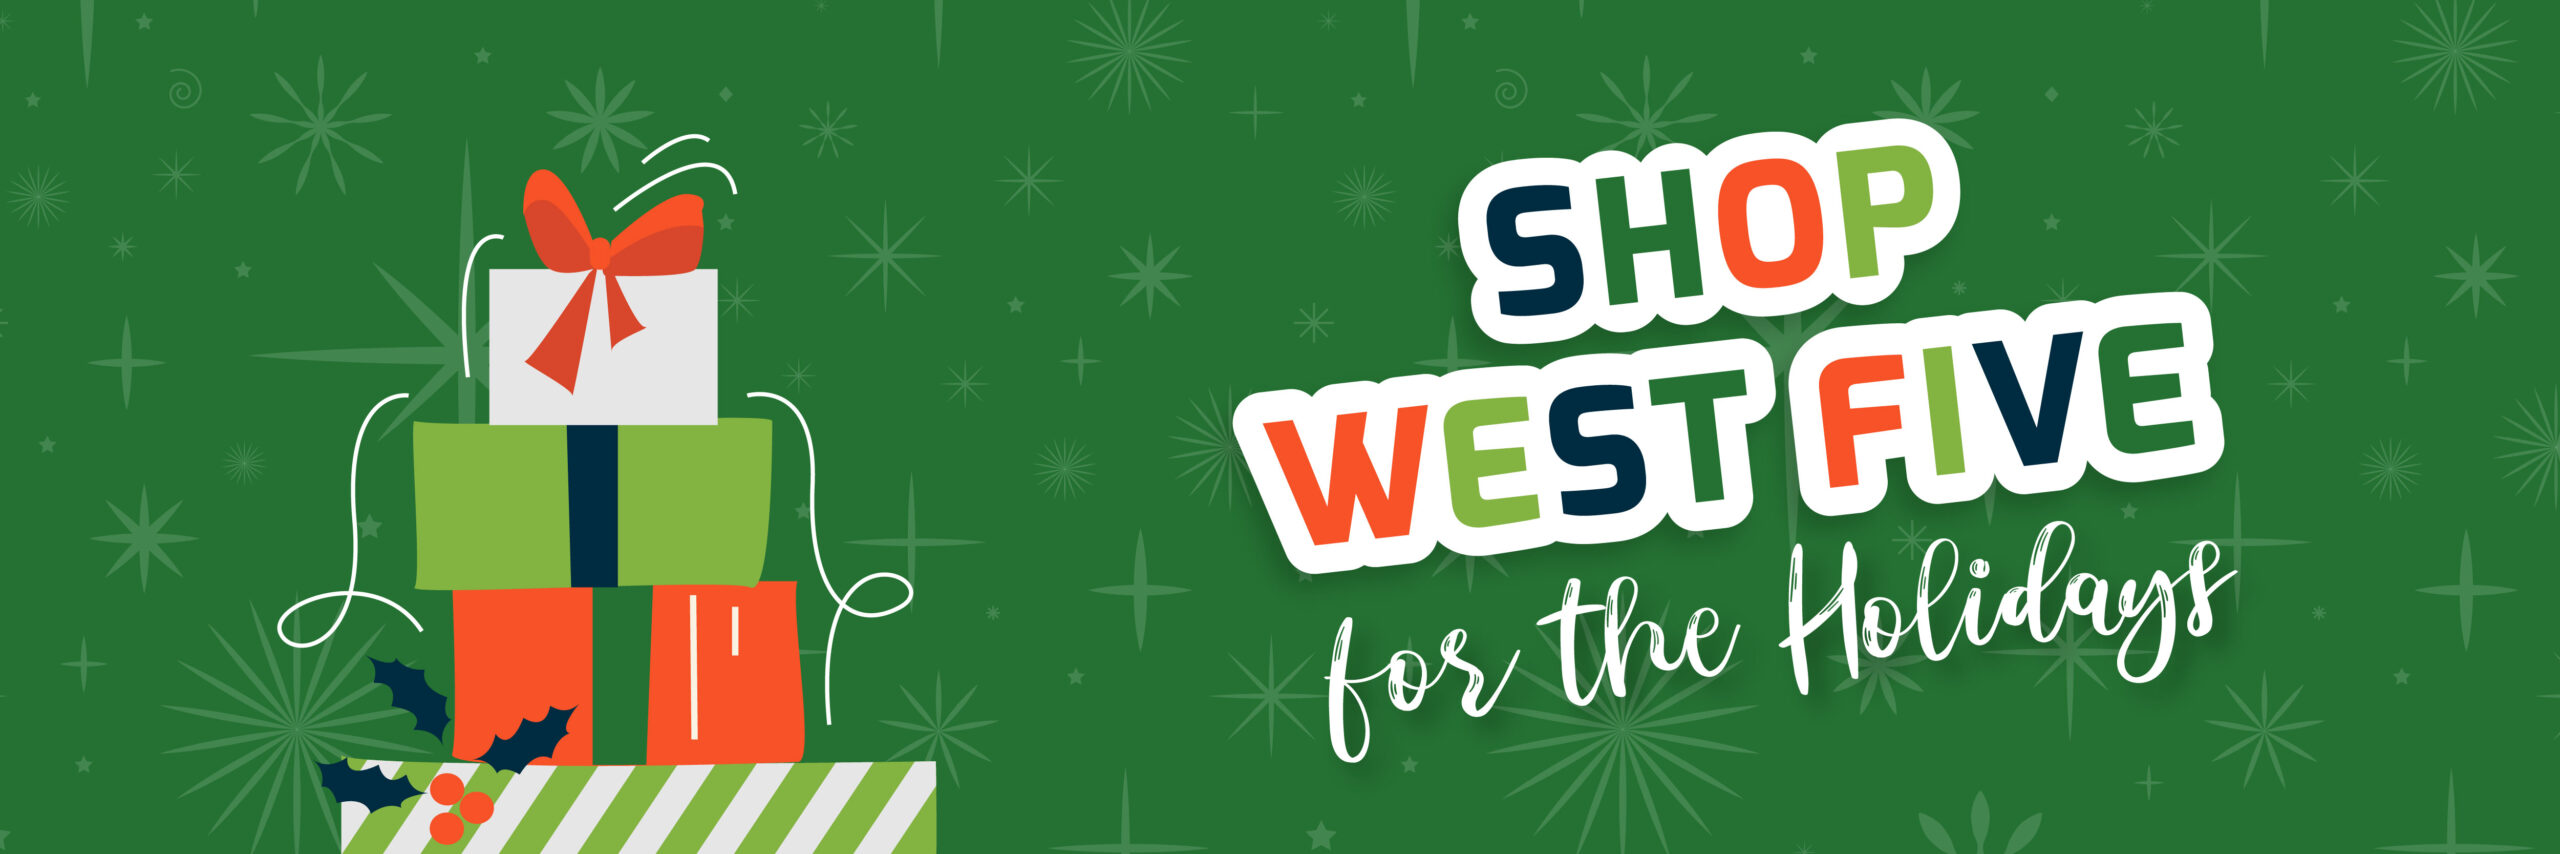 Shop West 5 for the holidays